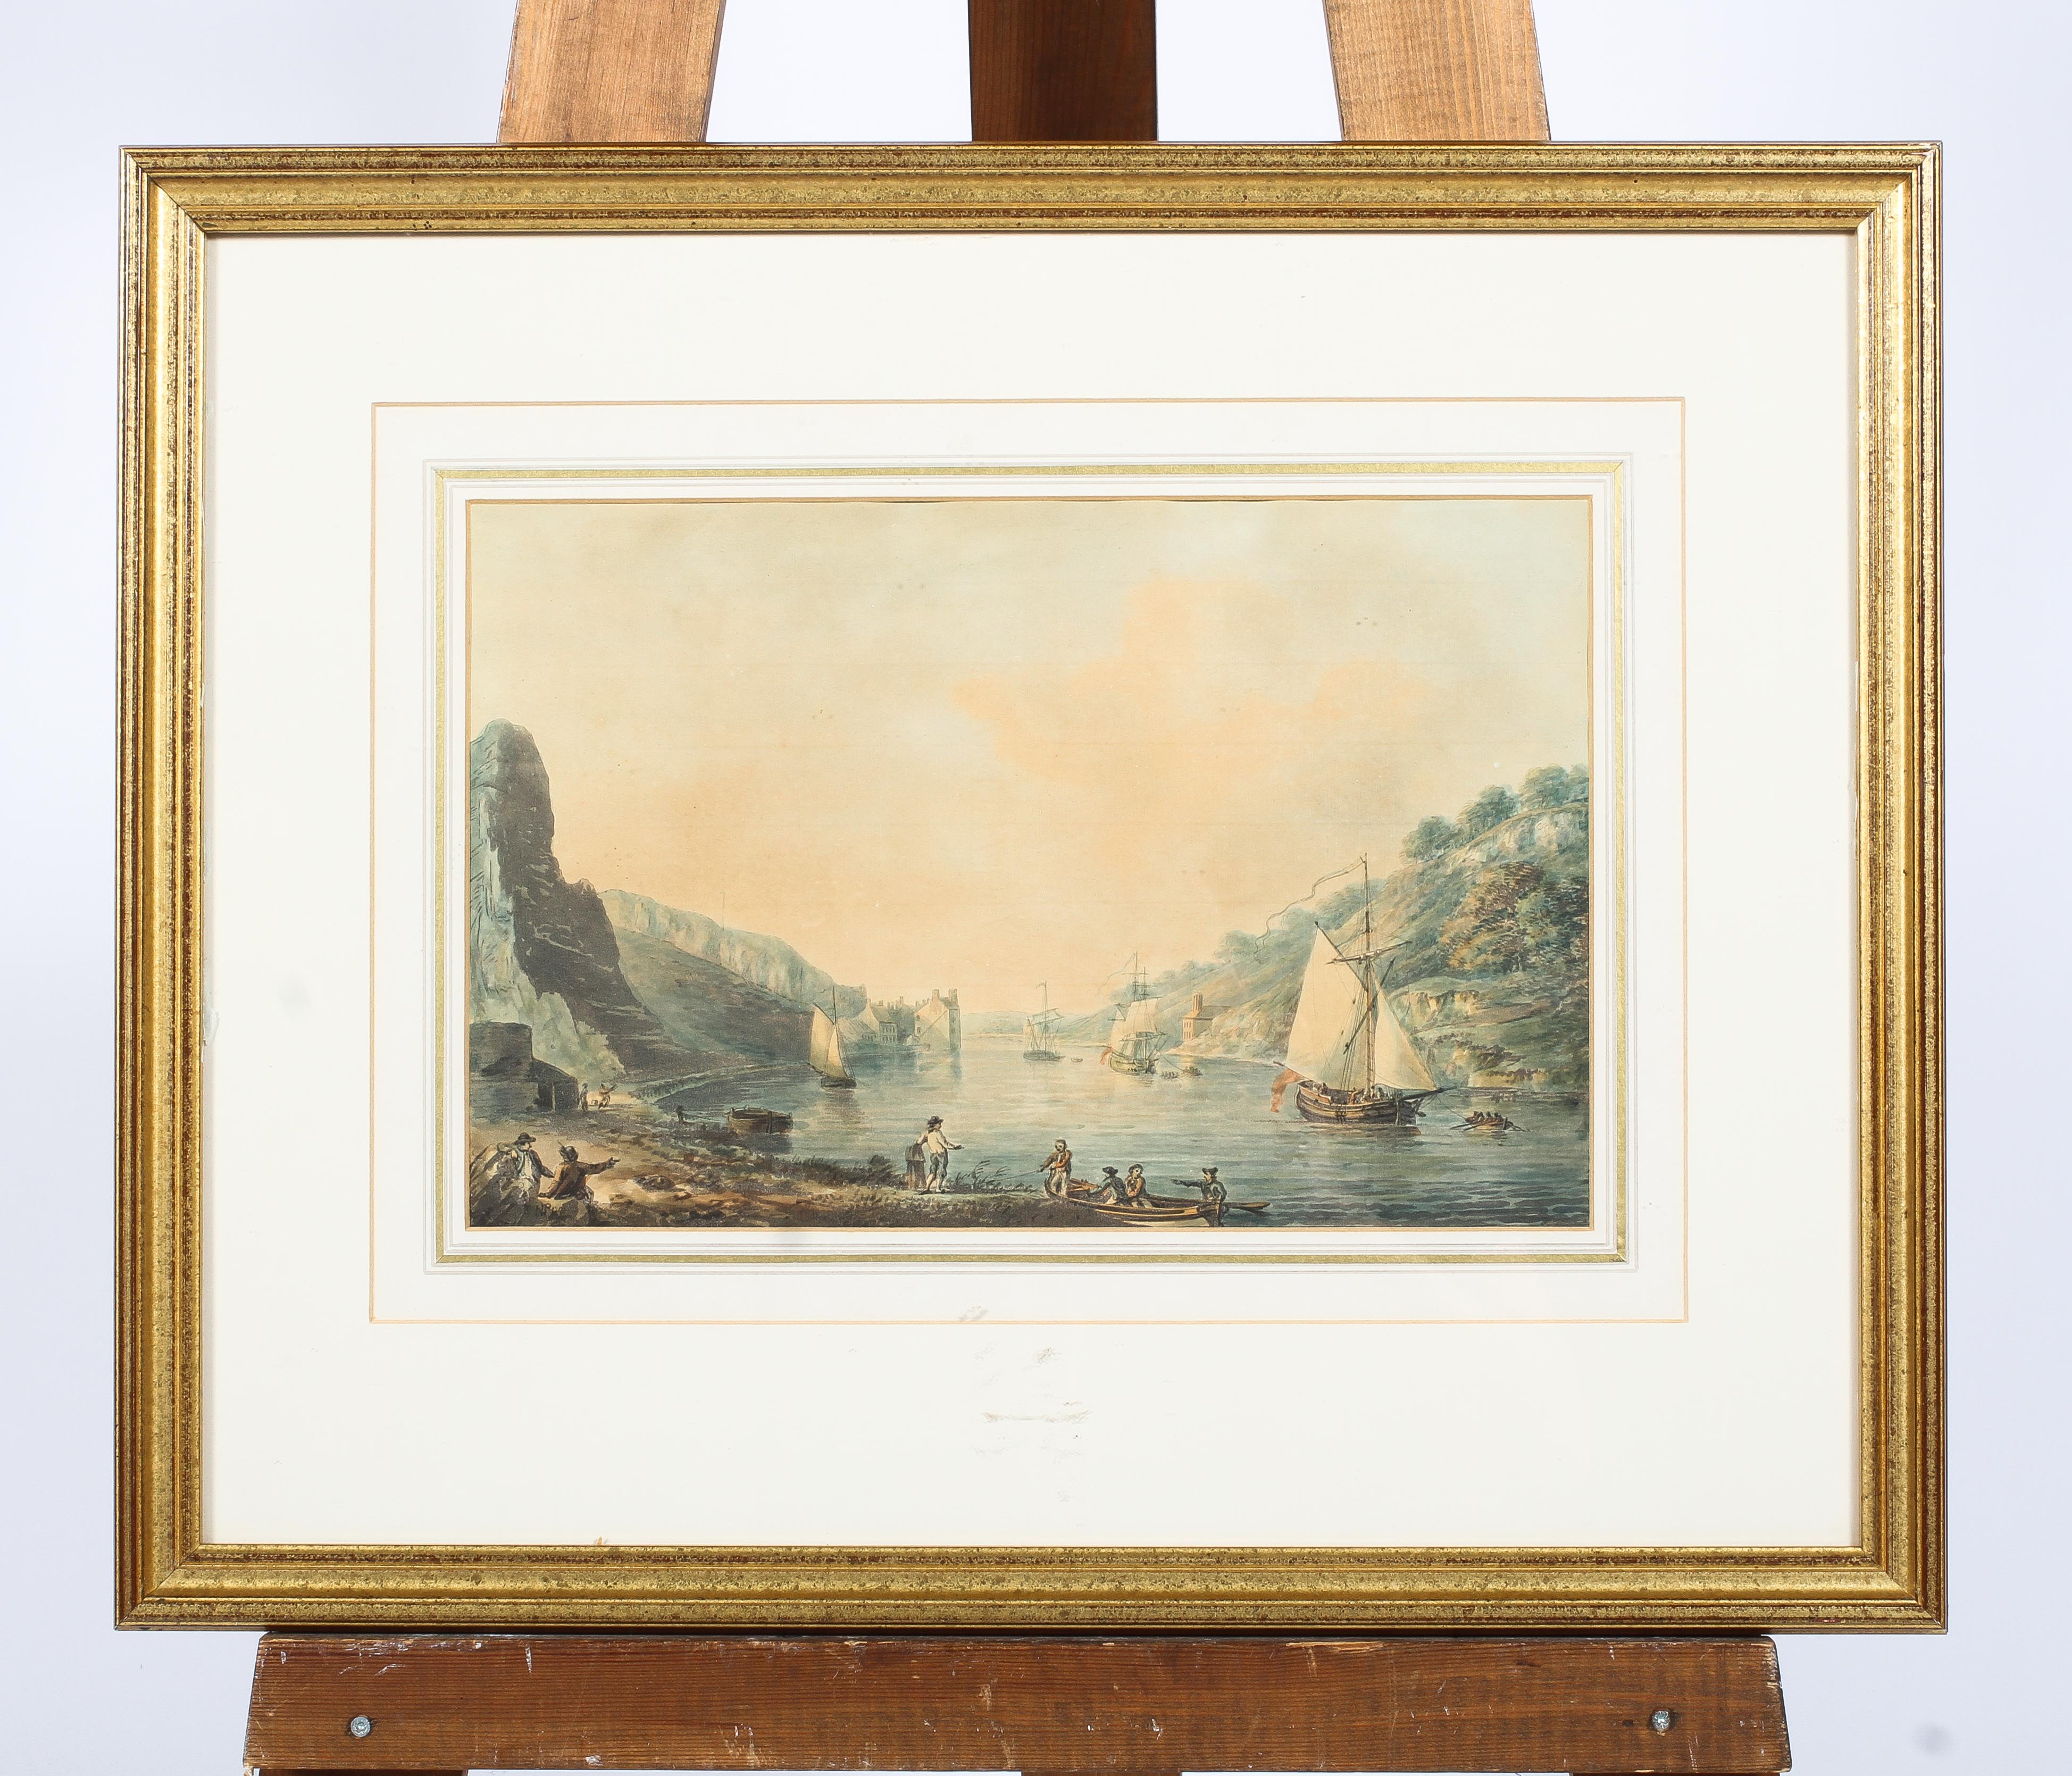 Nicholas Pocock, hand coloured print, 'Avon Gorge', signed and indistinctly dated lower left, - Image 6 of 8